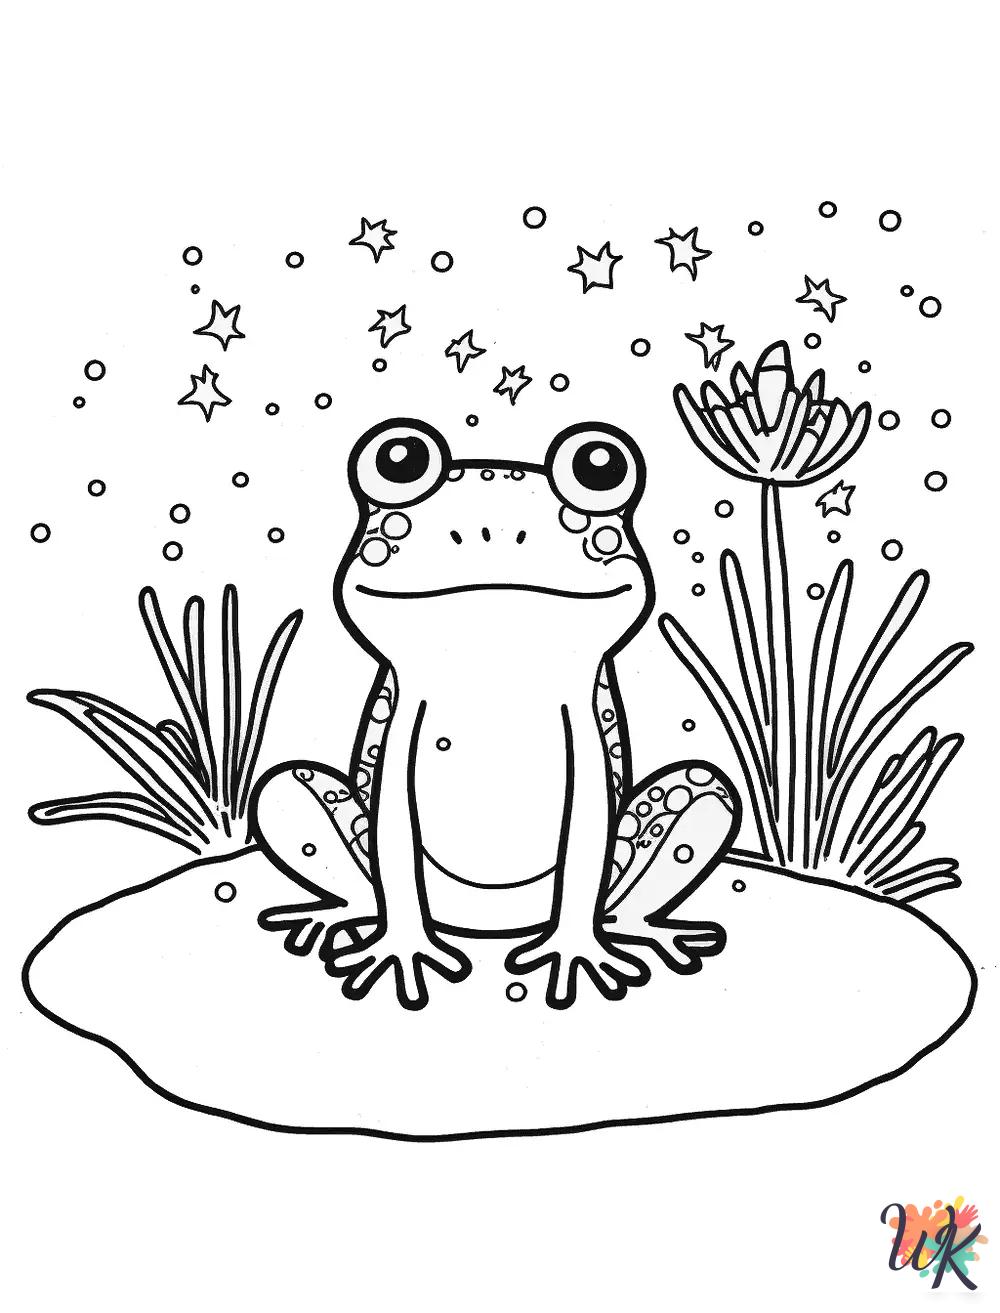 Frog coloring pages easy